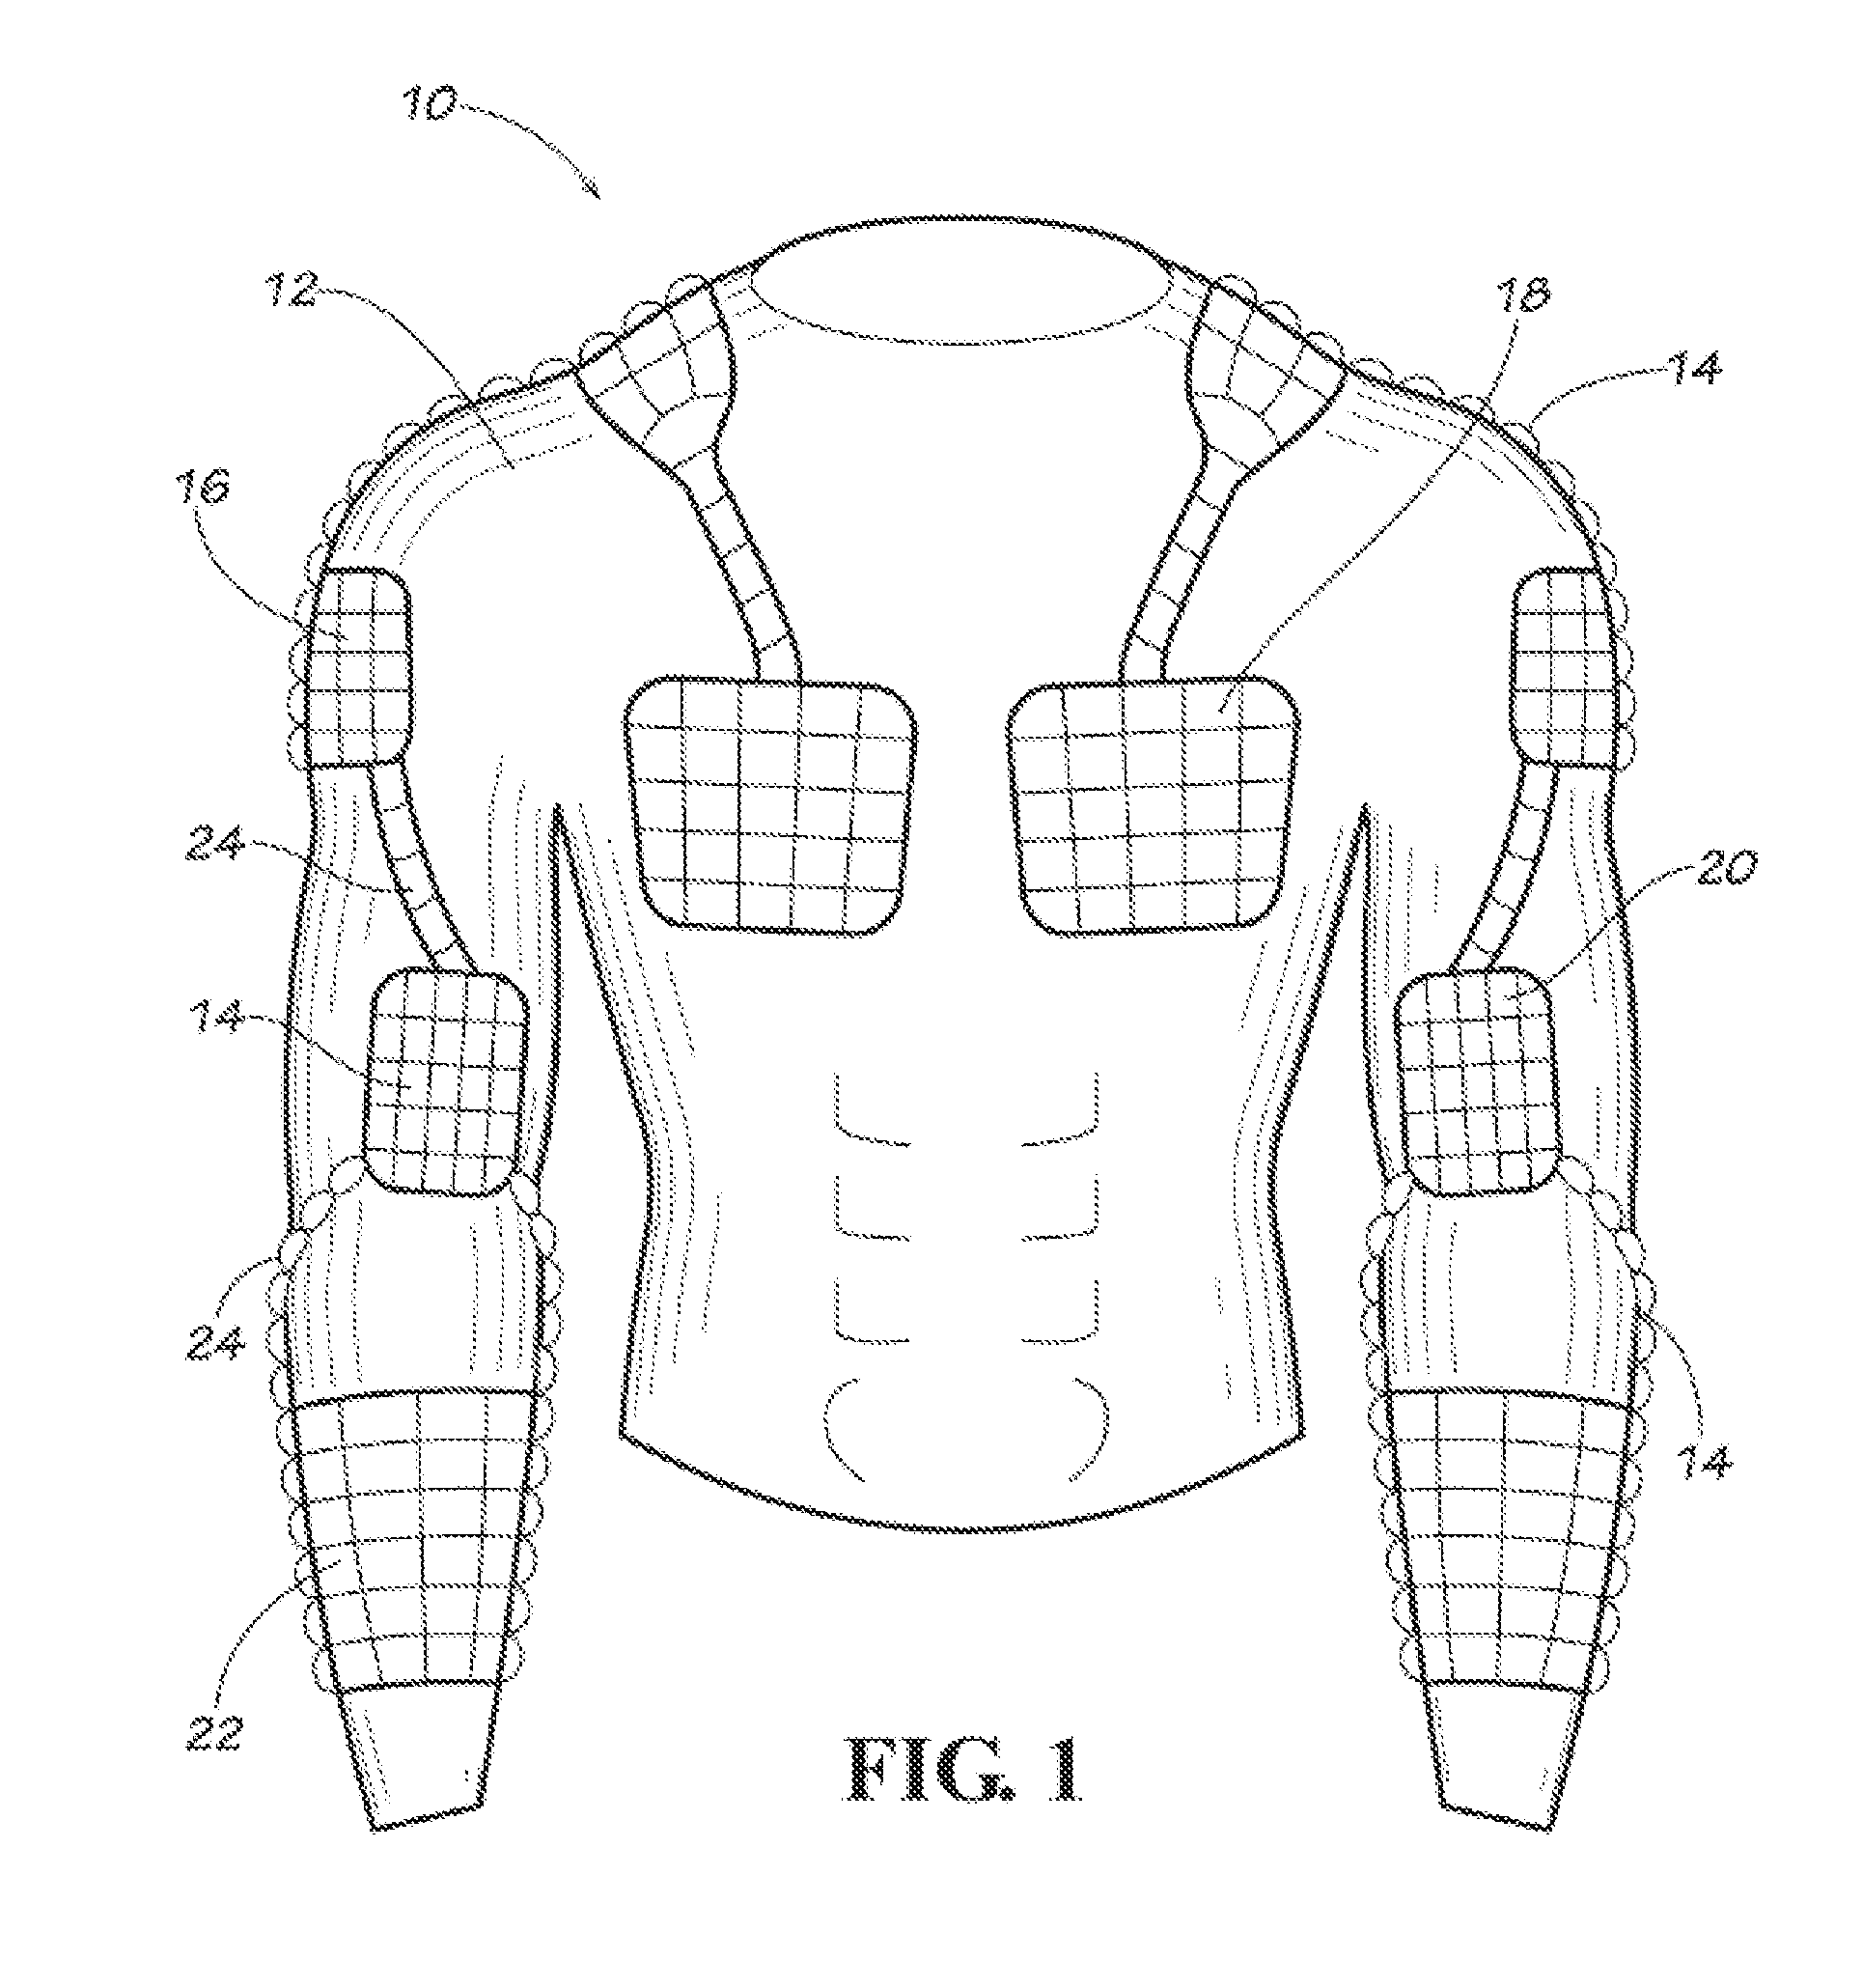 Clothing Systems Having Resistance Properties